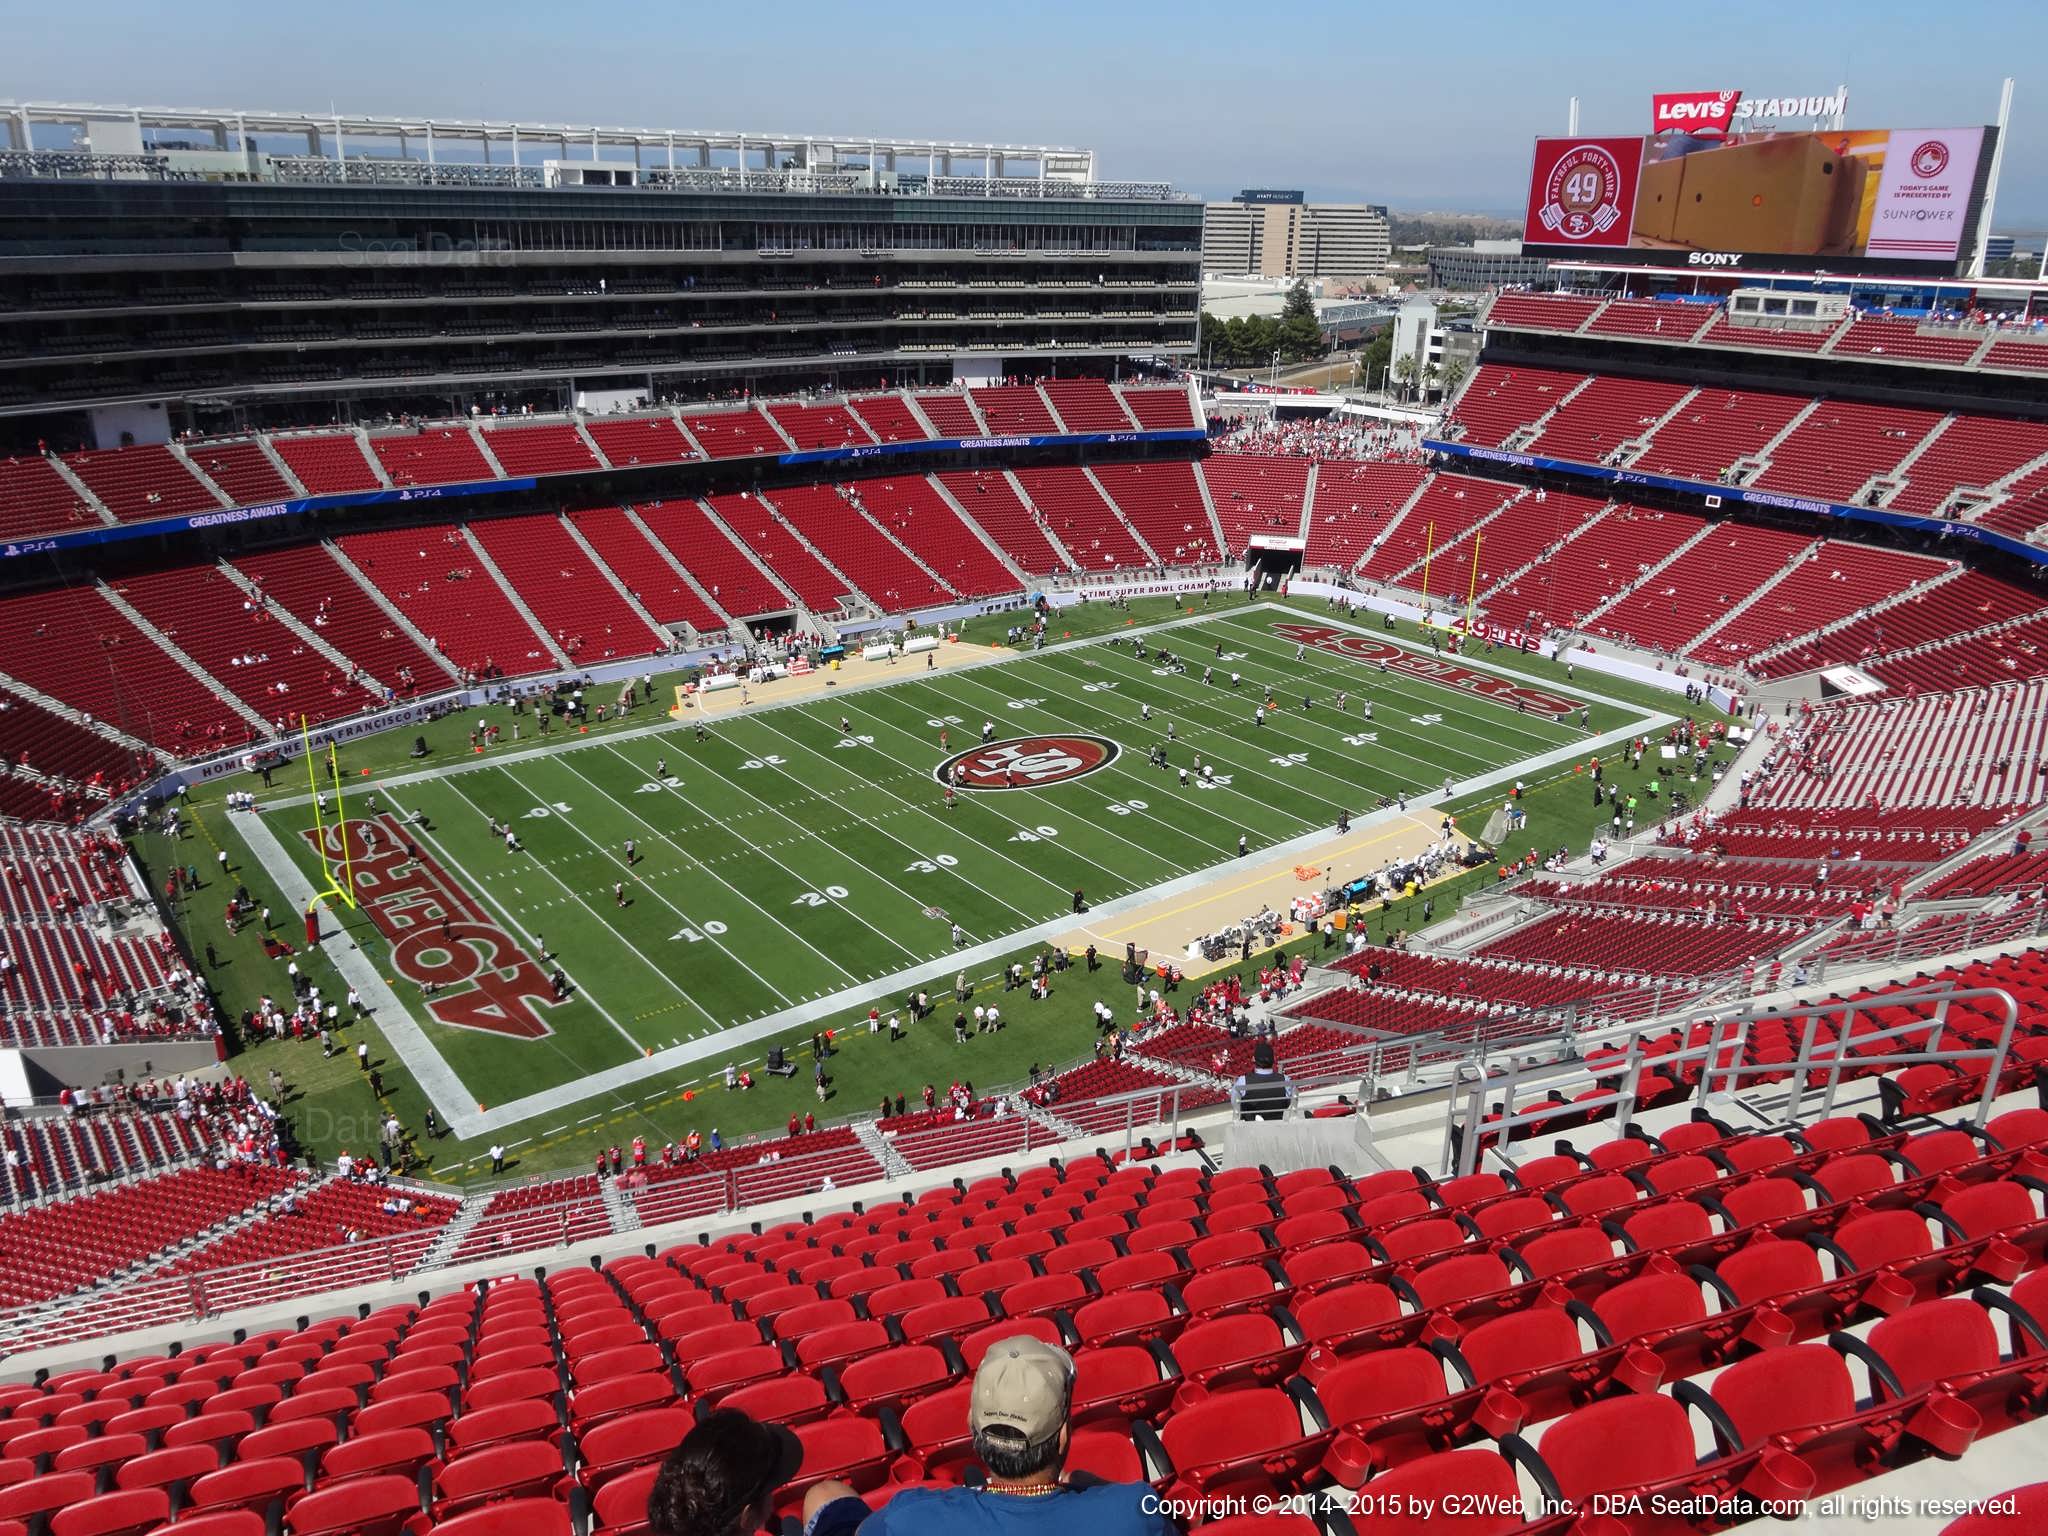 Seat view from section 417 at Levi’s Stadium, home of the San Francisco 49ers